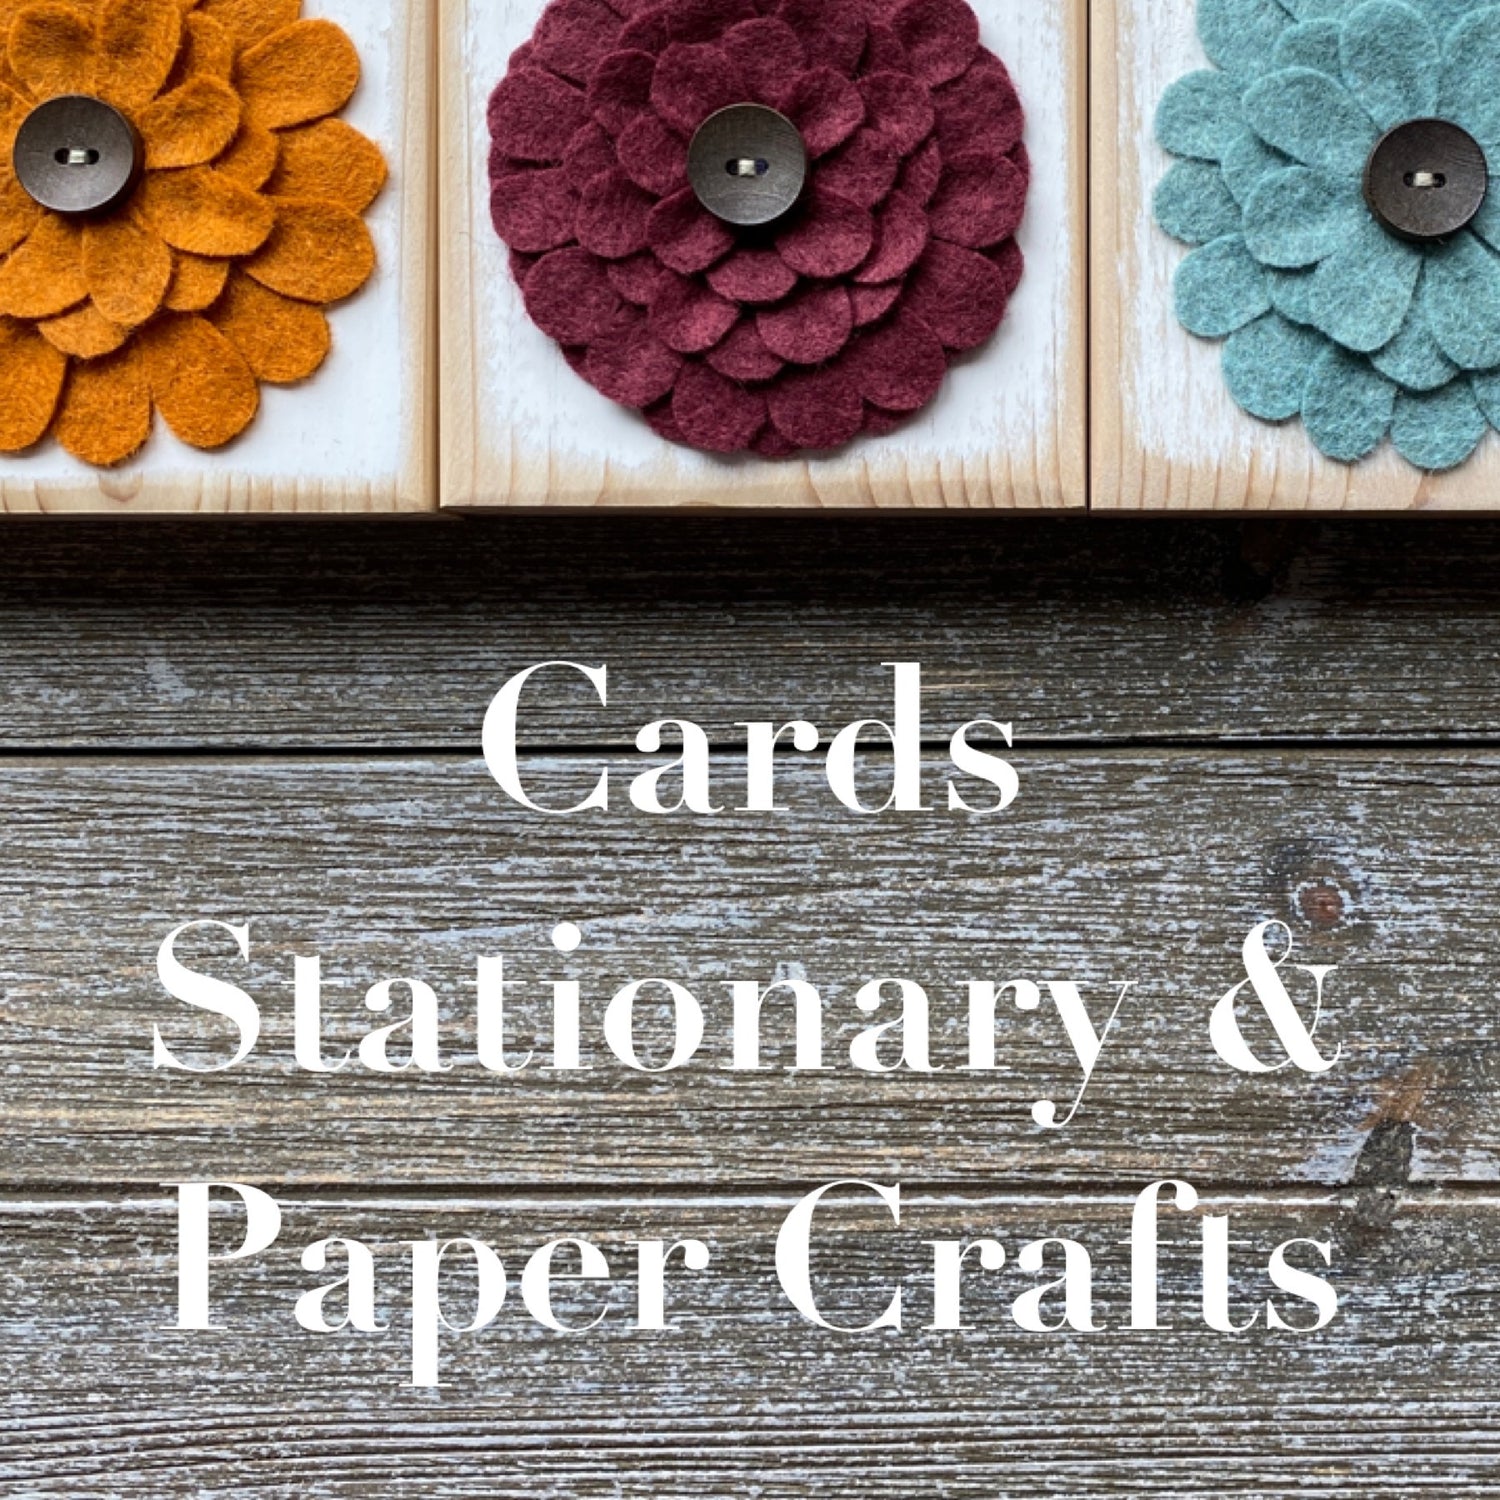 Cards Stationary & Paper Crafts